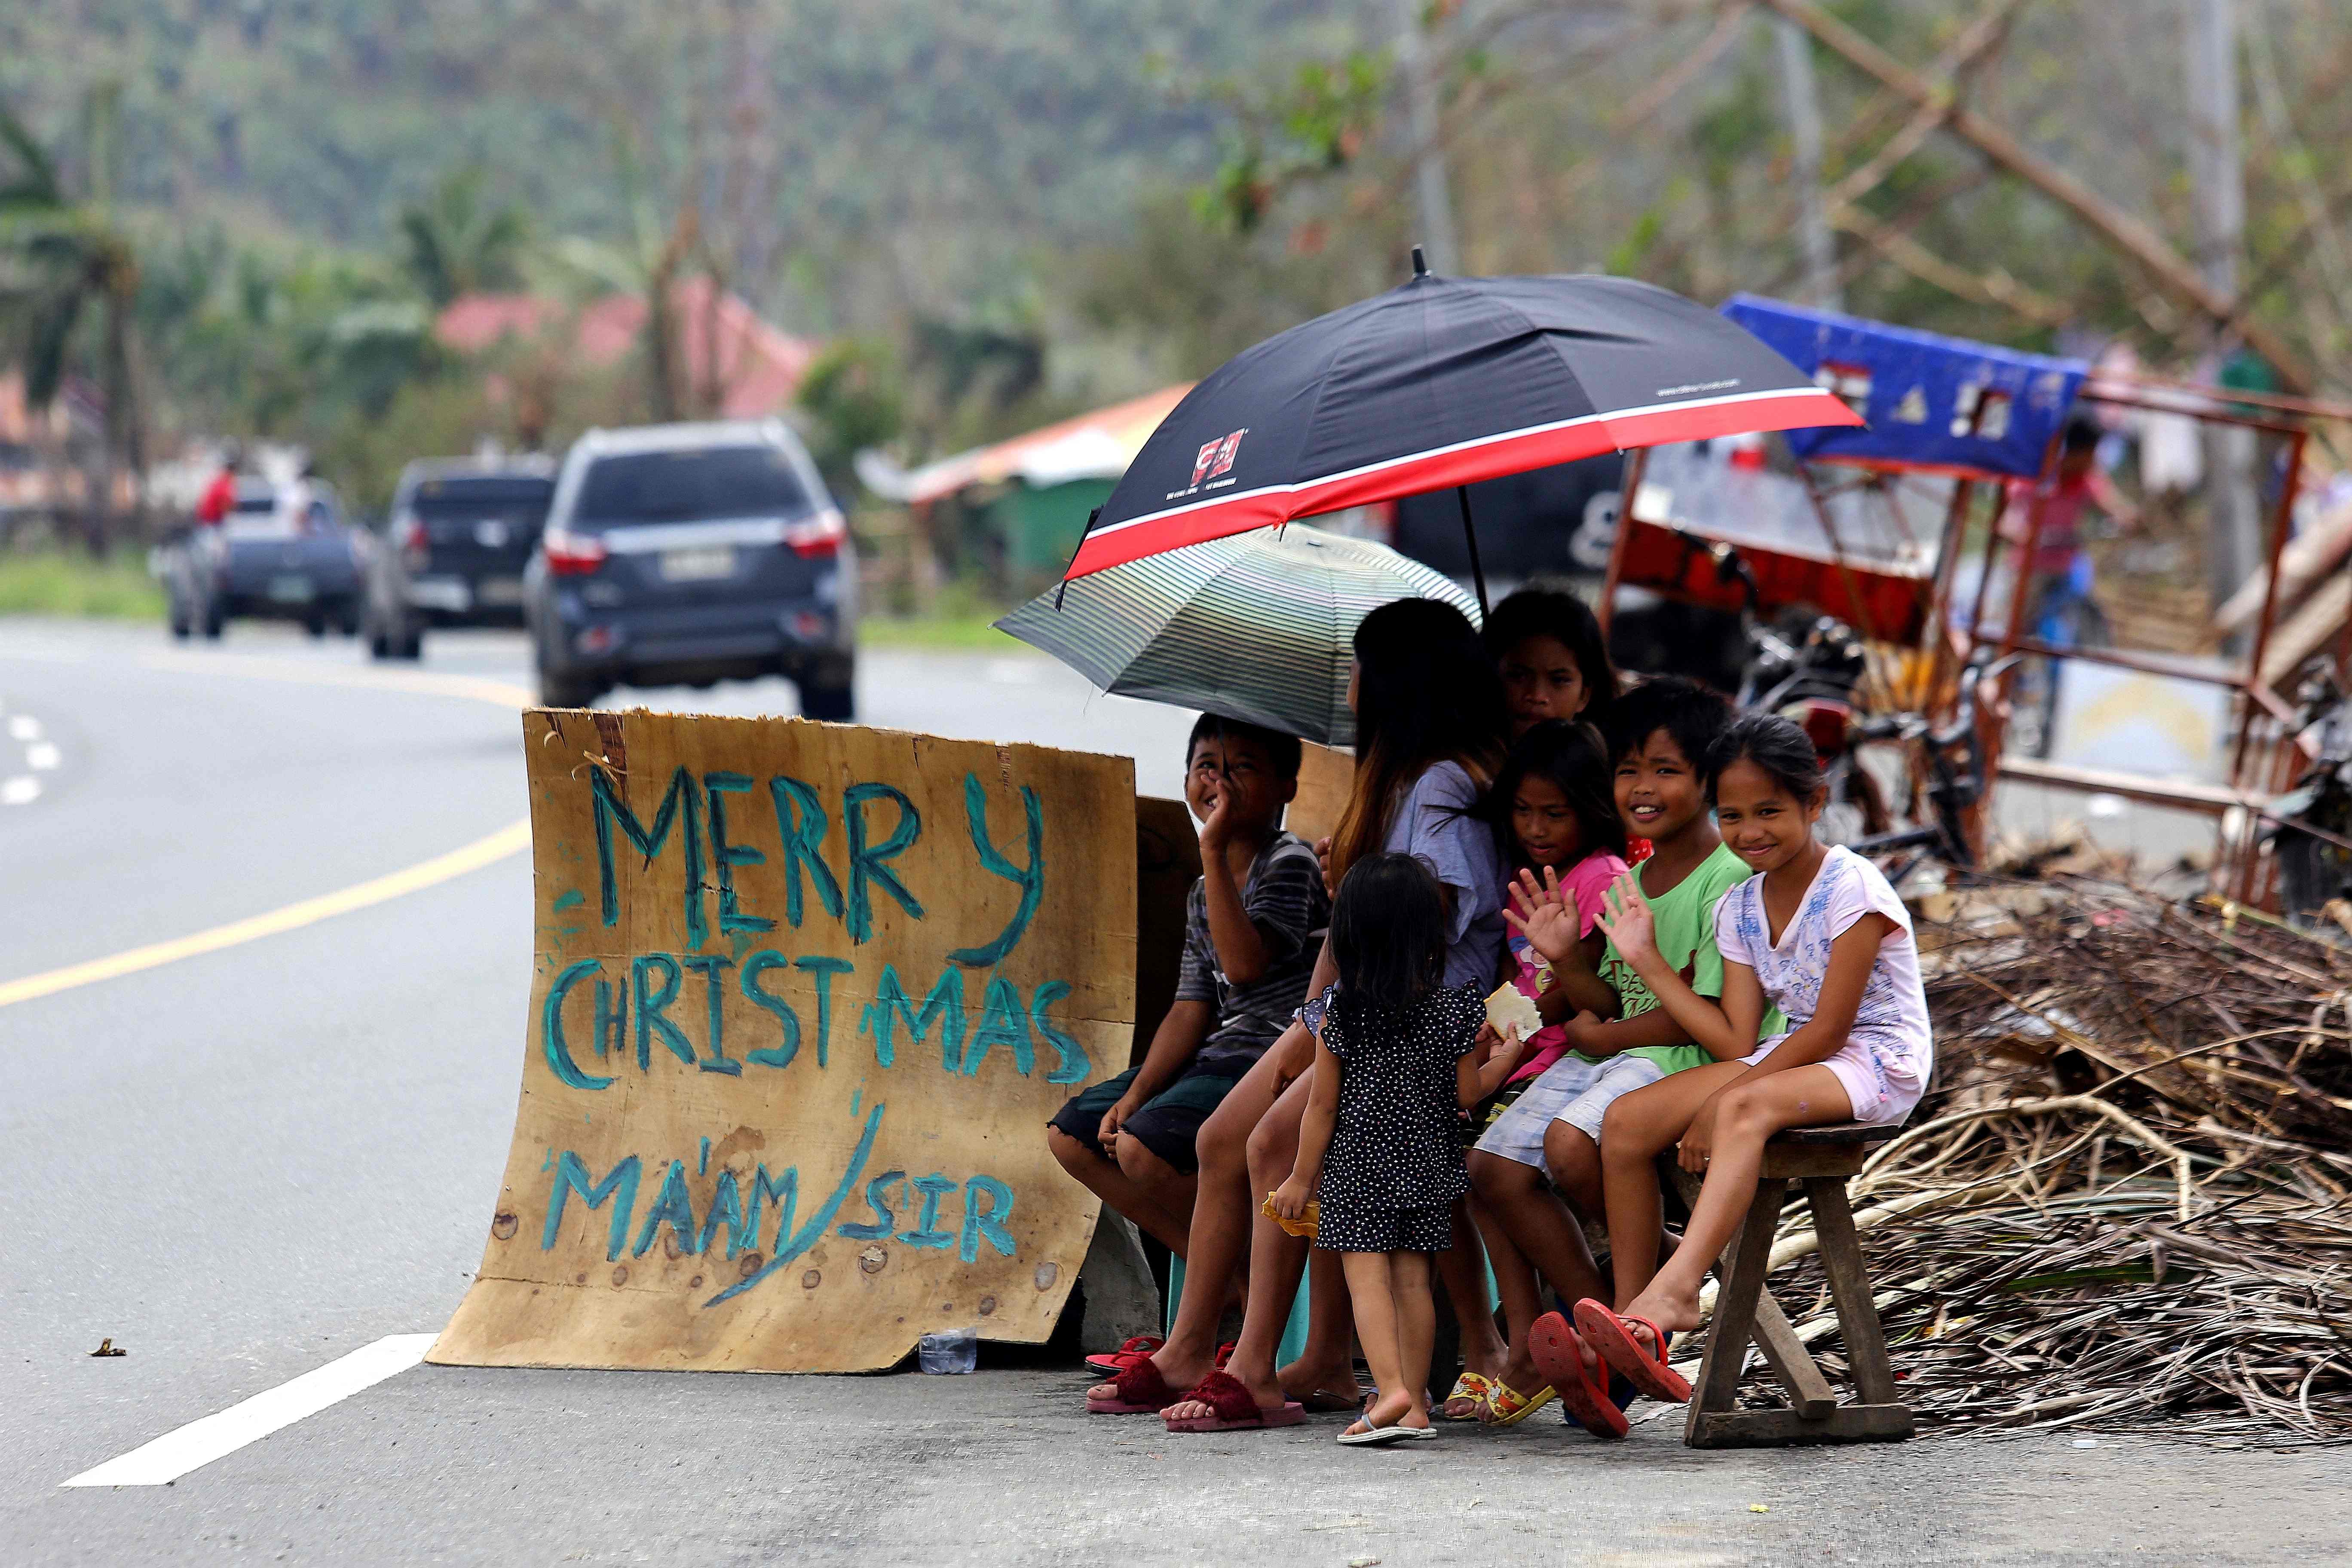 Children display a sign with Christmas greetings as they ask for alms following Typhoon Rai in Surigao City, Philippines, 25 December 2021